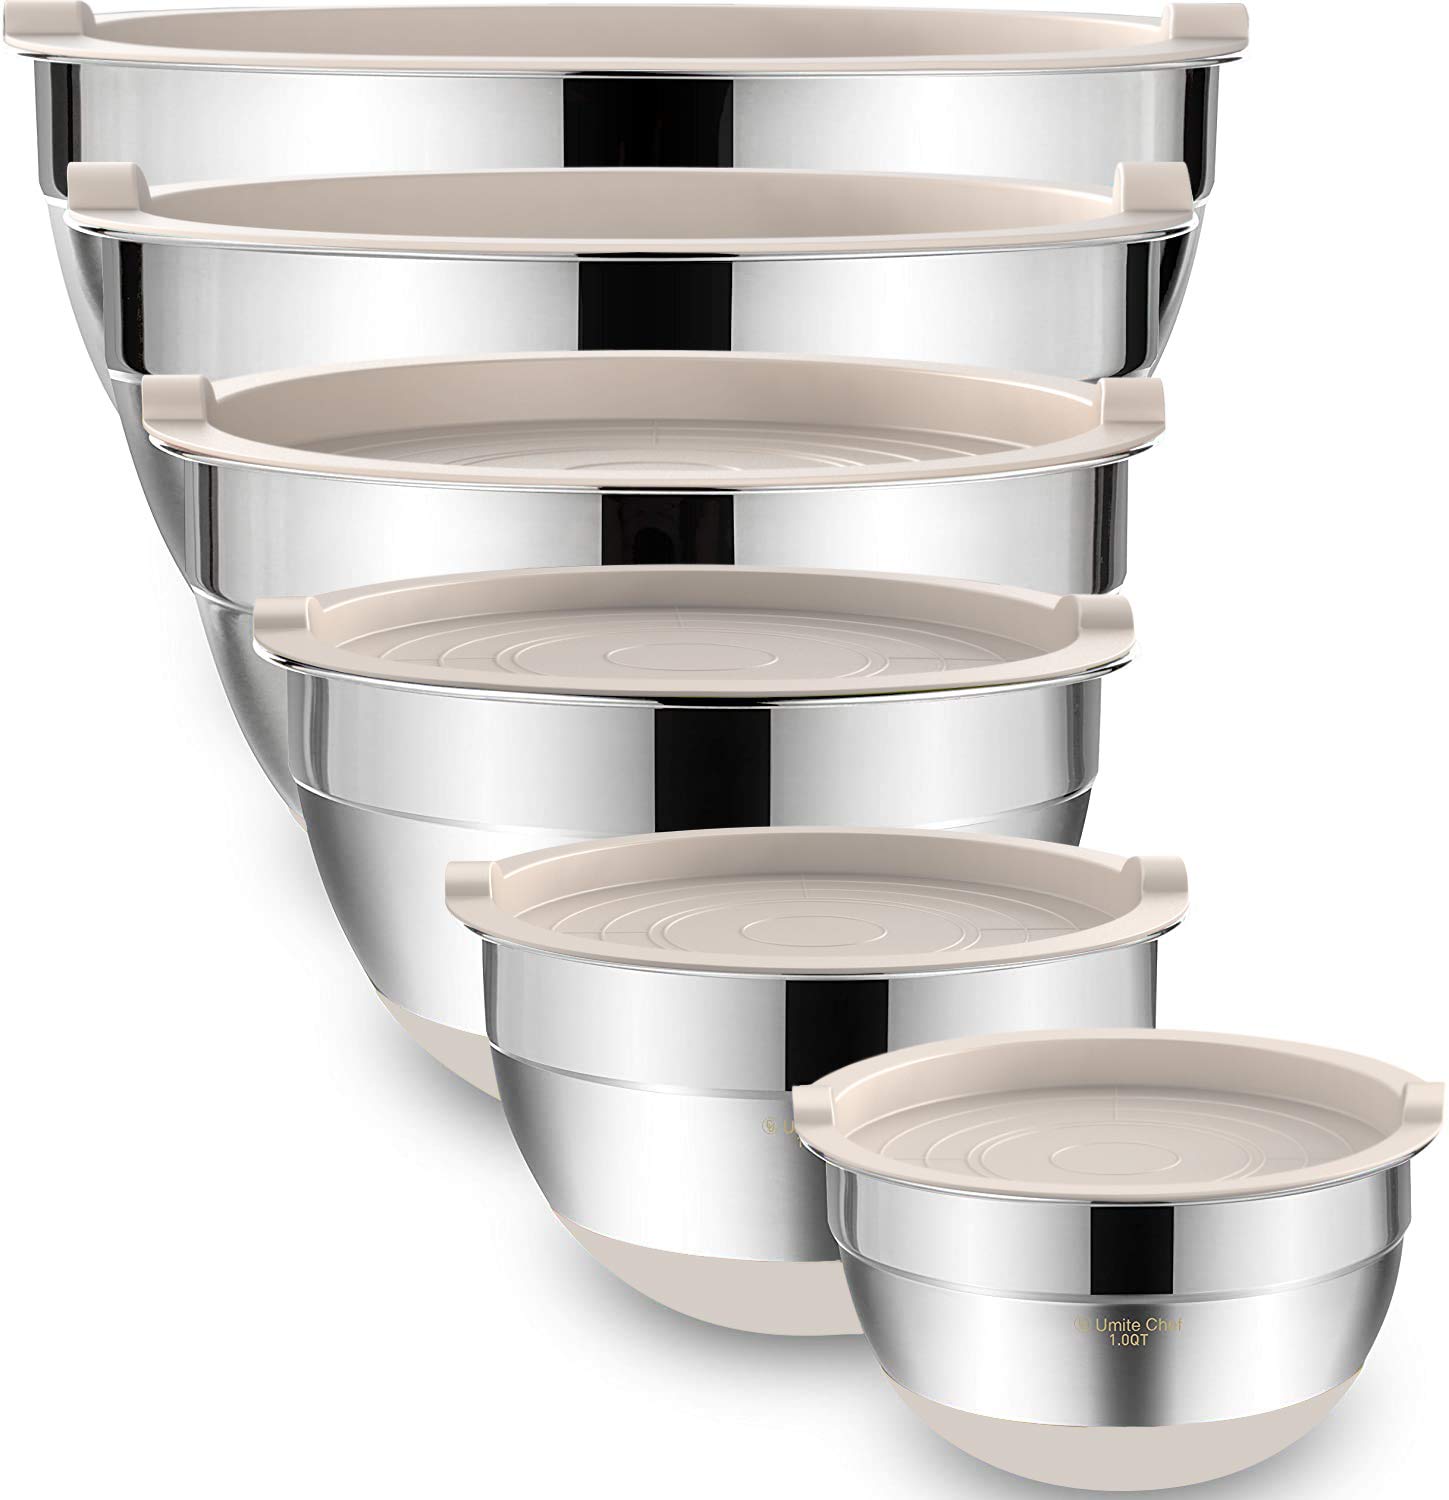 Mixing Bowls with Airtight Lids，6 piece Stainless Steel Metal Nesting Storage Bowls by Umite Chef, Non-Slip Bottoms Size 7, 3.5, 2.5, 2.0,1.5, 1QT,...